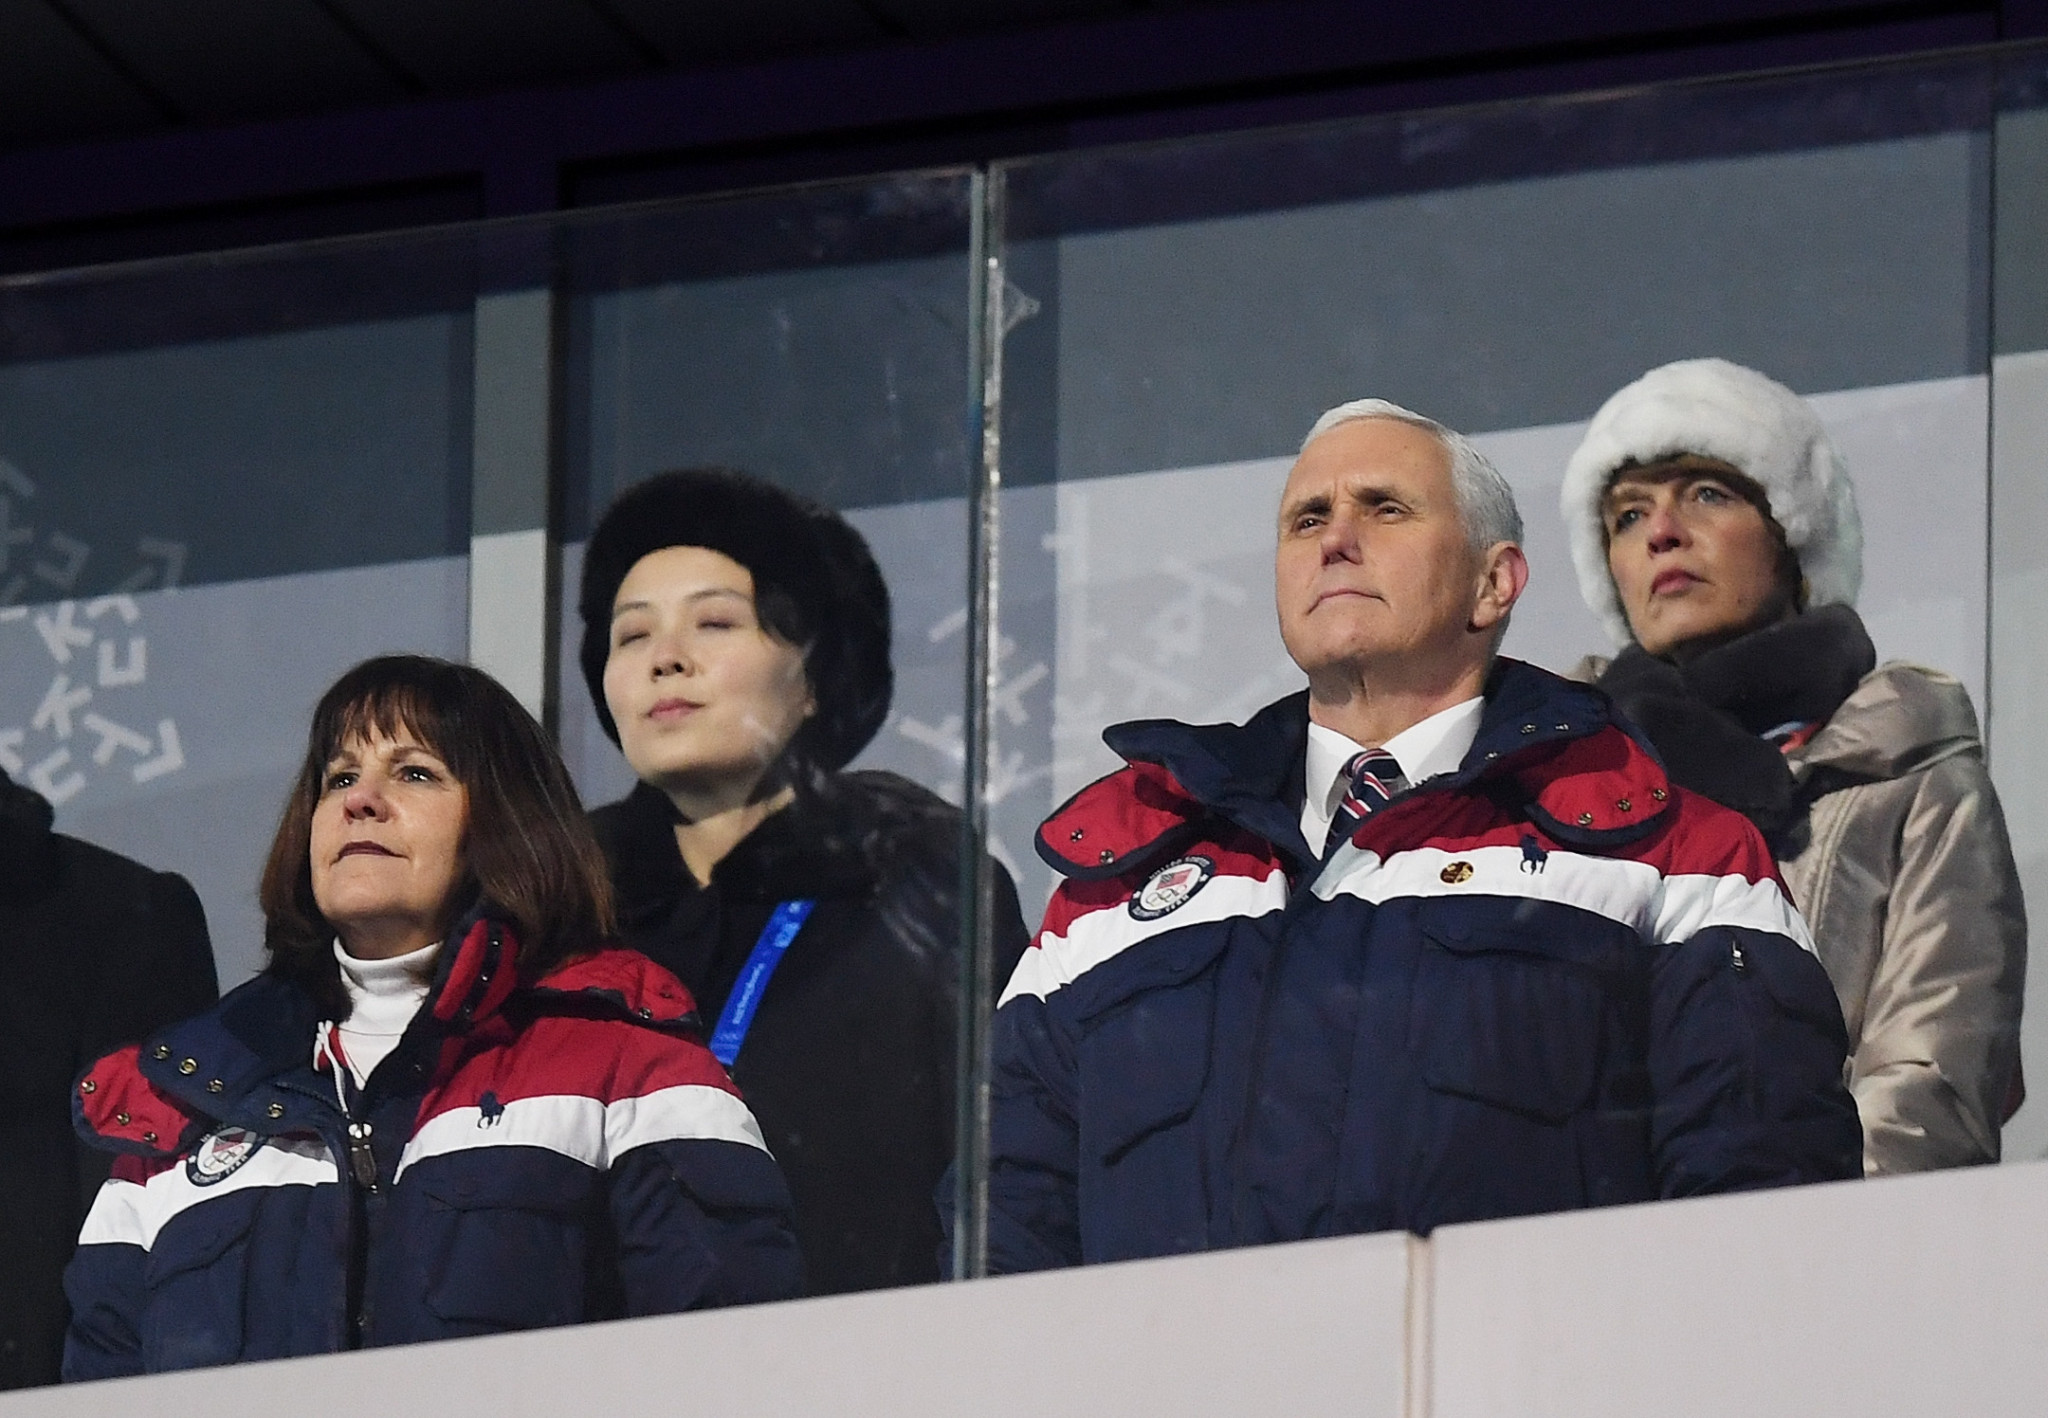 United States Vice-President Mike Pence attended the Opening Ceremony of the 2018 Winter Olympic Games in Pyeongchang ©Getty Images